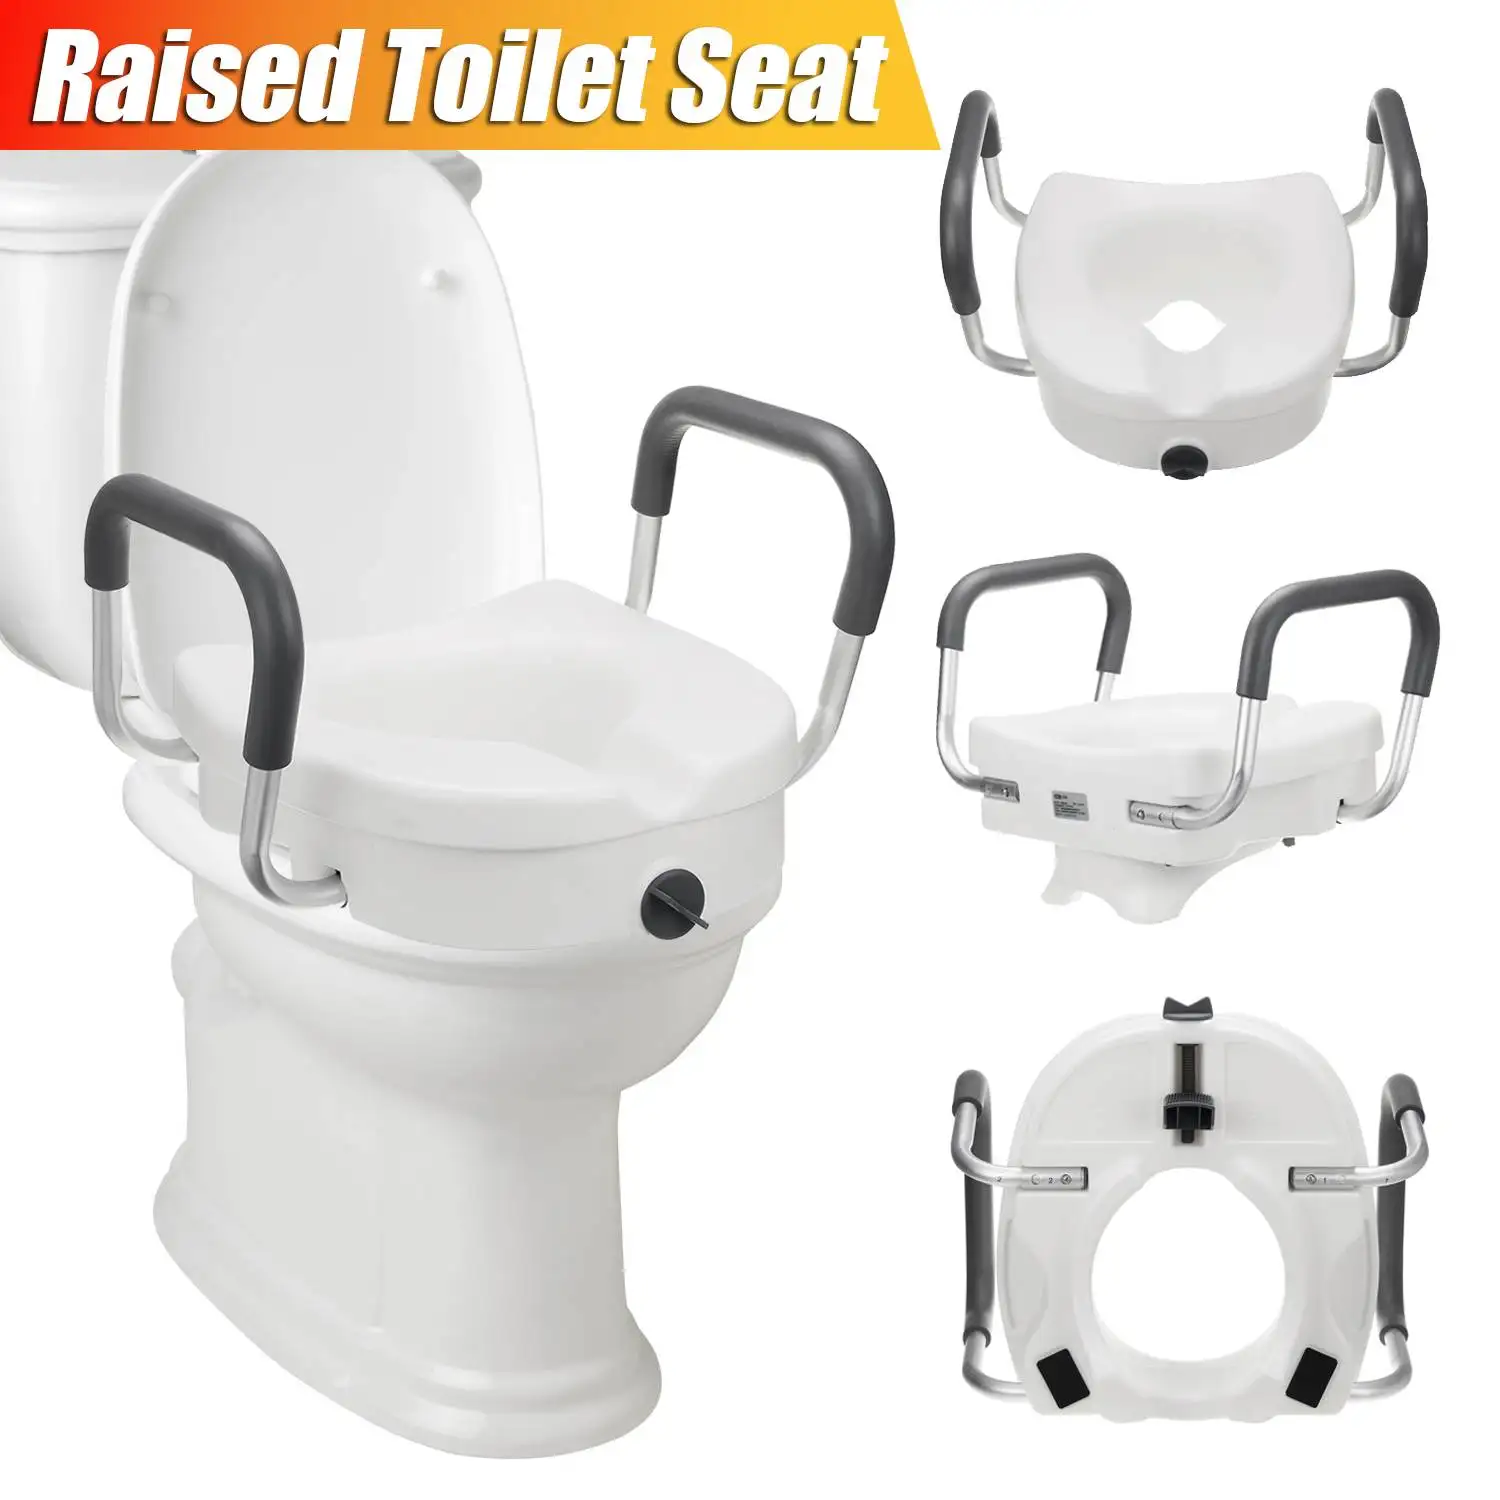 Removable Raised Toilet Seat With Arms Handles Padded Disability Aid Toilet Seat Elderly Pregnant Heightening Toilet Supports